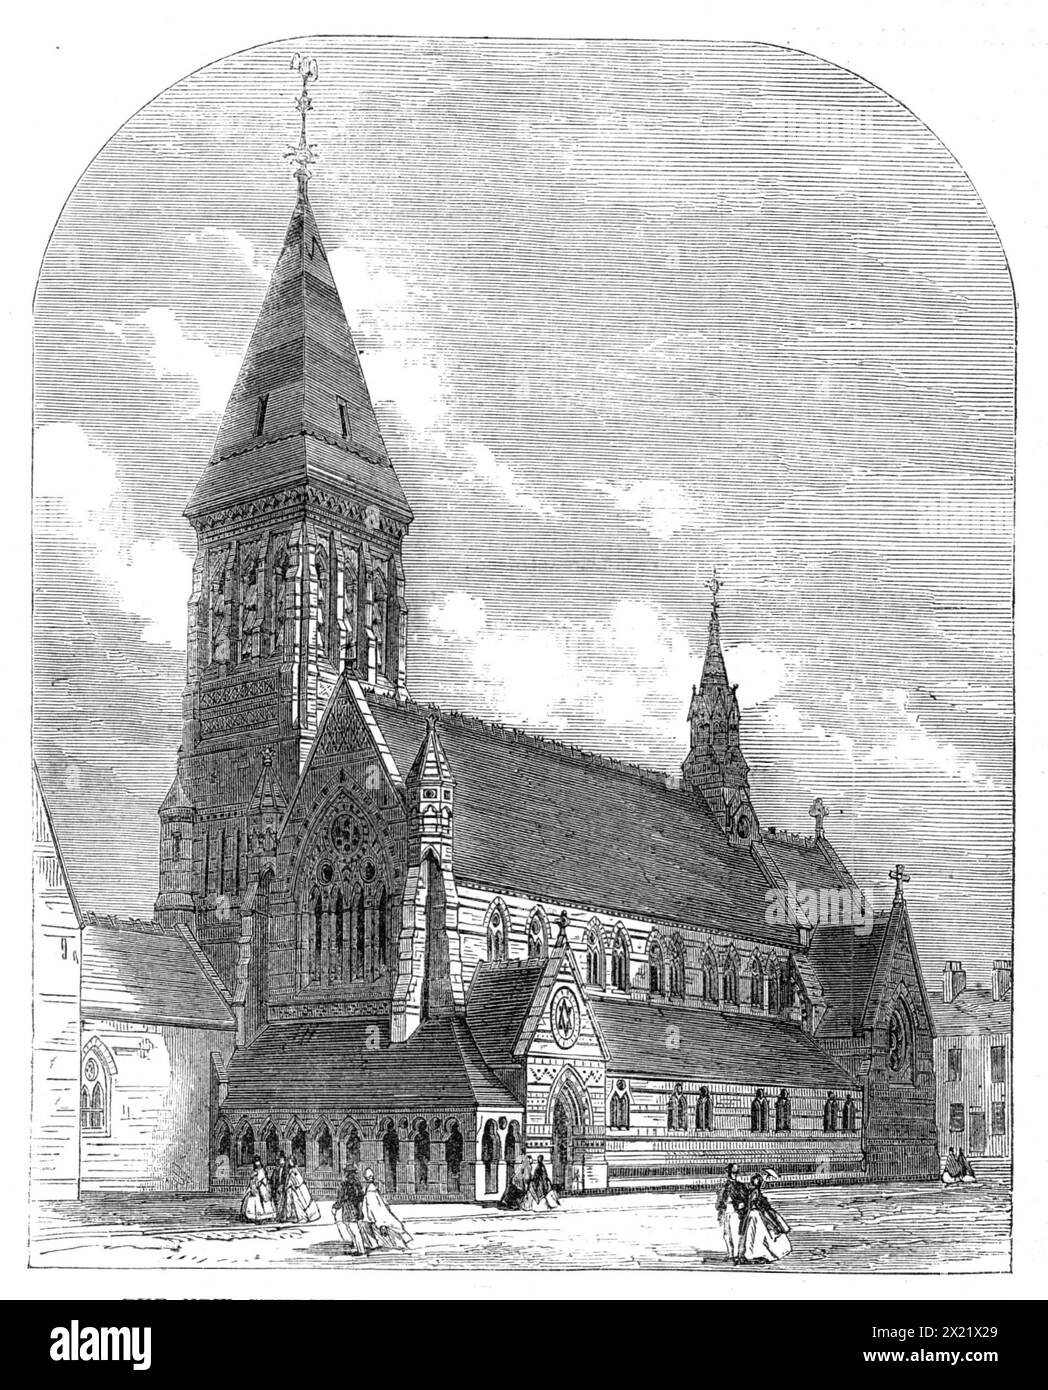 The new Church of St. Michael and All Angels, Shoreditch, [London], 1865. View of the '...finished exterior...Architecturally, it is perhaps one of the finest churches lately built in London, being large enough to accommodate 1000 worshippers without any galleries, though only seated at present for 750...The materials used are brick and stone inside and out...The architect is Mr, James Brooks, of Serle-street, Lincoln's-inn-fields'. From &quot;Illustrated London News&quot;, 1865. Stock Photo